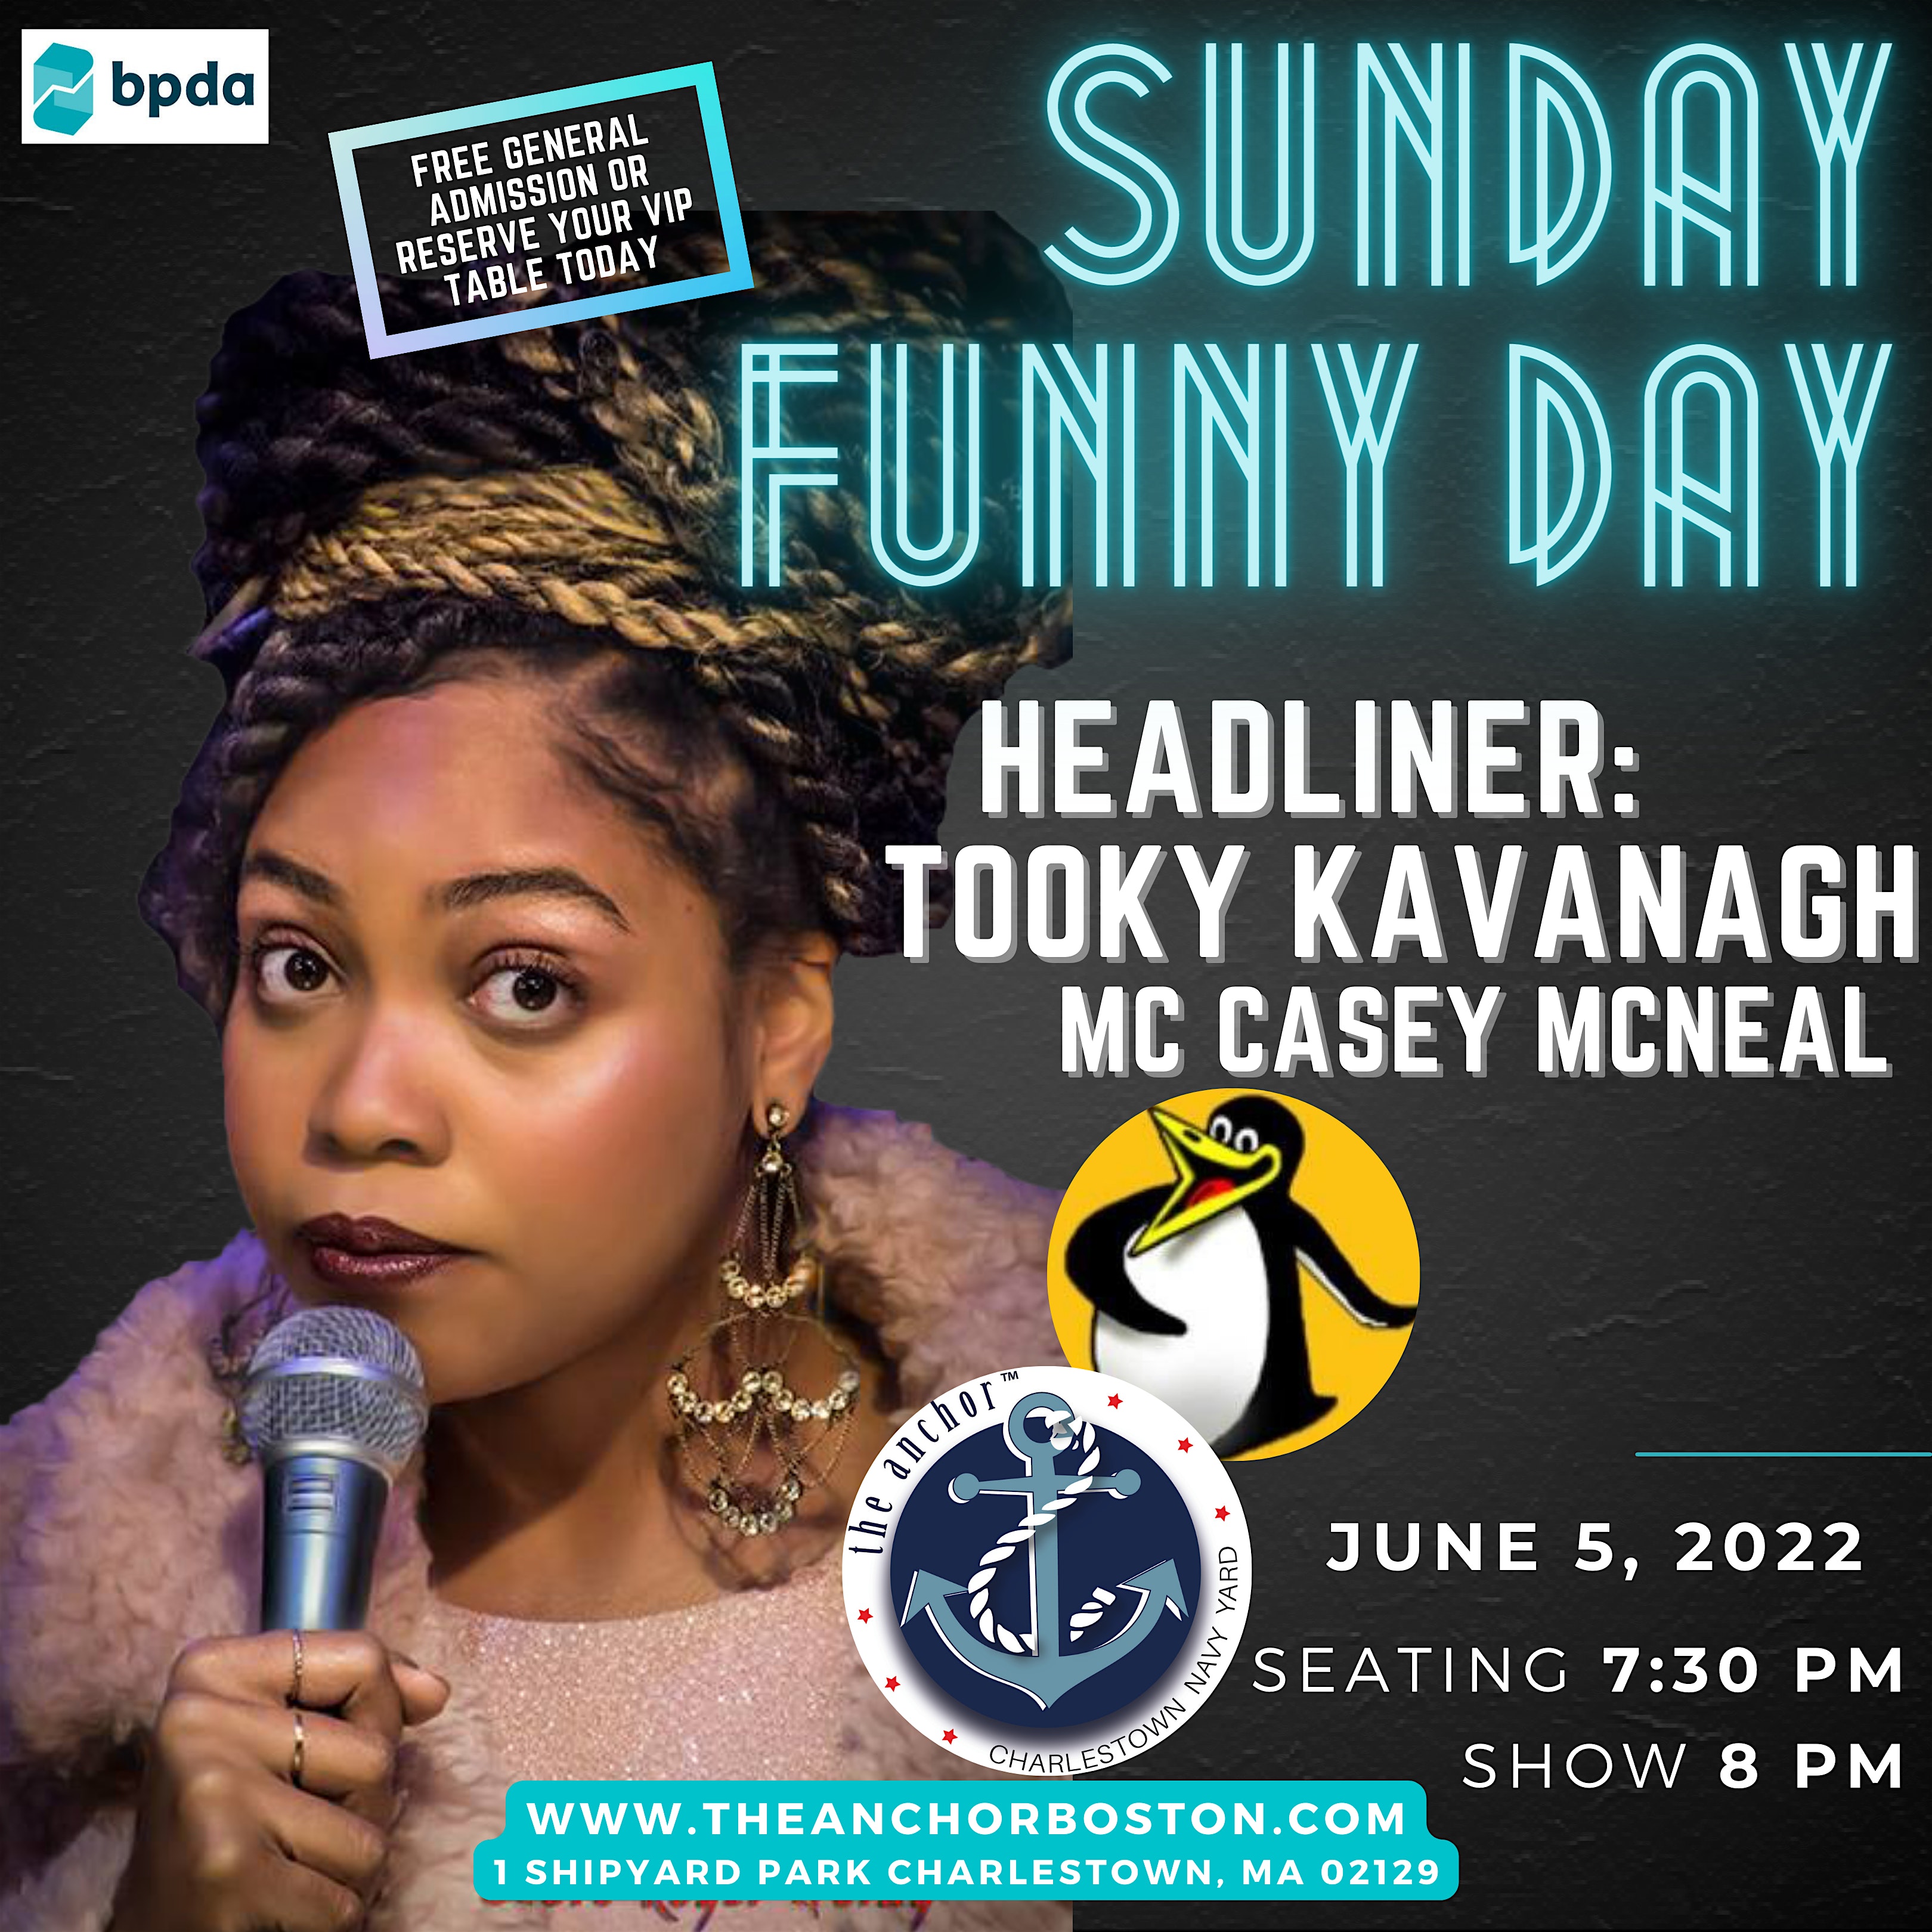 Sundays: Stand-up at The Anchor, Charlestown – It’s Sunday Funny Day!